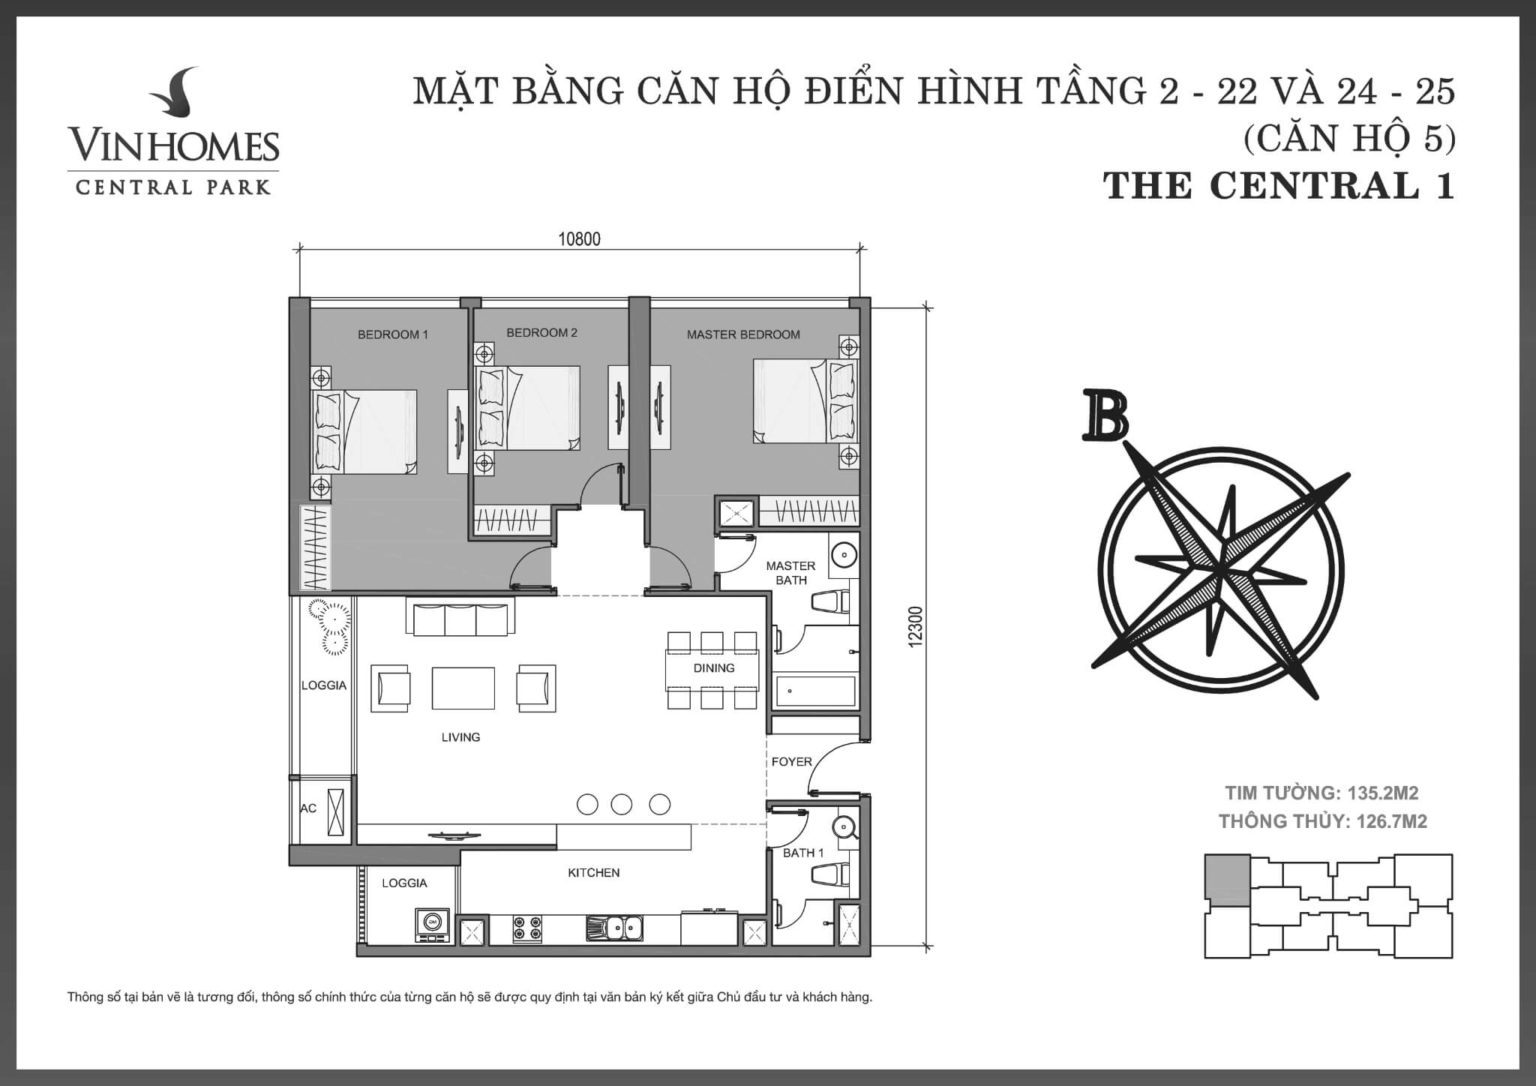 202301/01/08/192500-layout-central-c1-05-tang-02-25-1536x1086.jpg